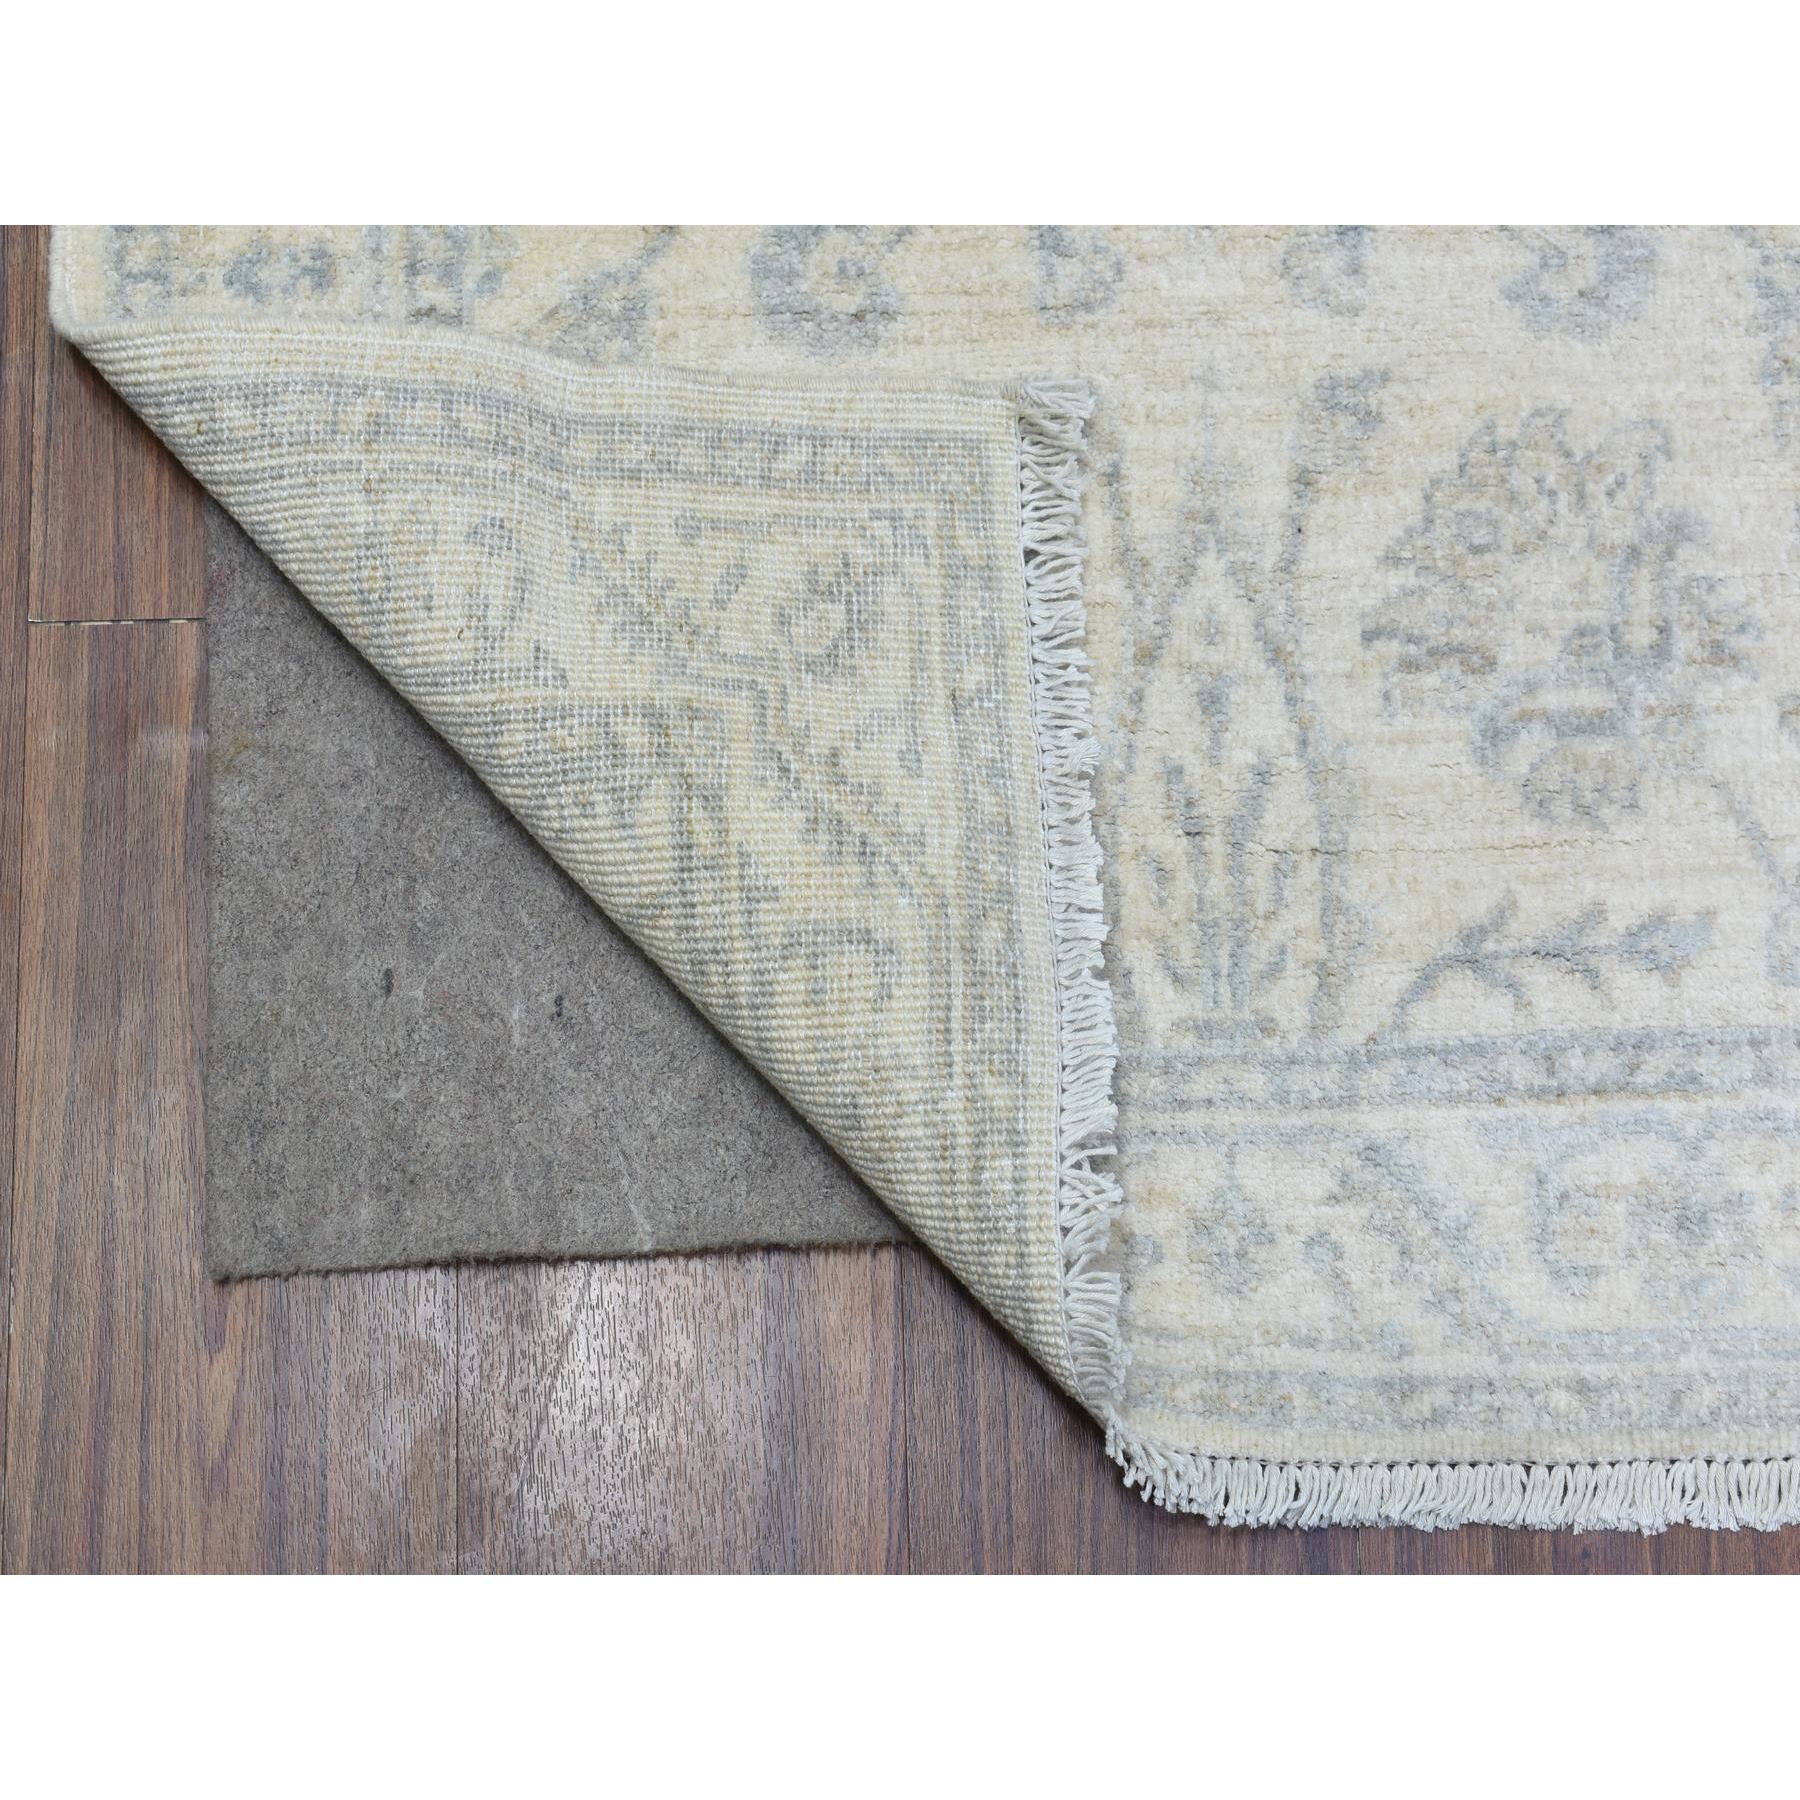 2'9"x9'4" Ivory, White Wash Peshawar with All Over Mahal Design Natural Dyes, Extra Soft Wool Hand Woven, Runner Oriental Rug 